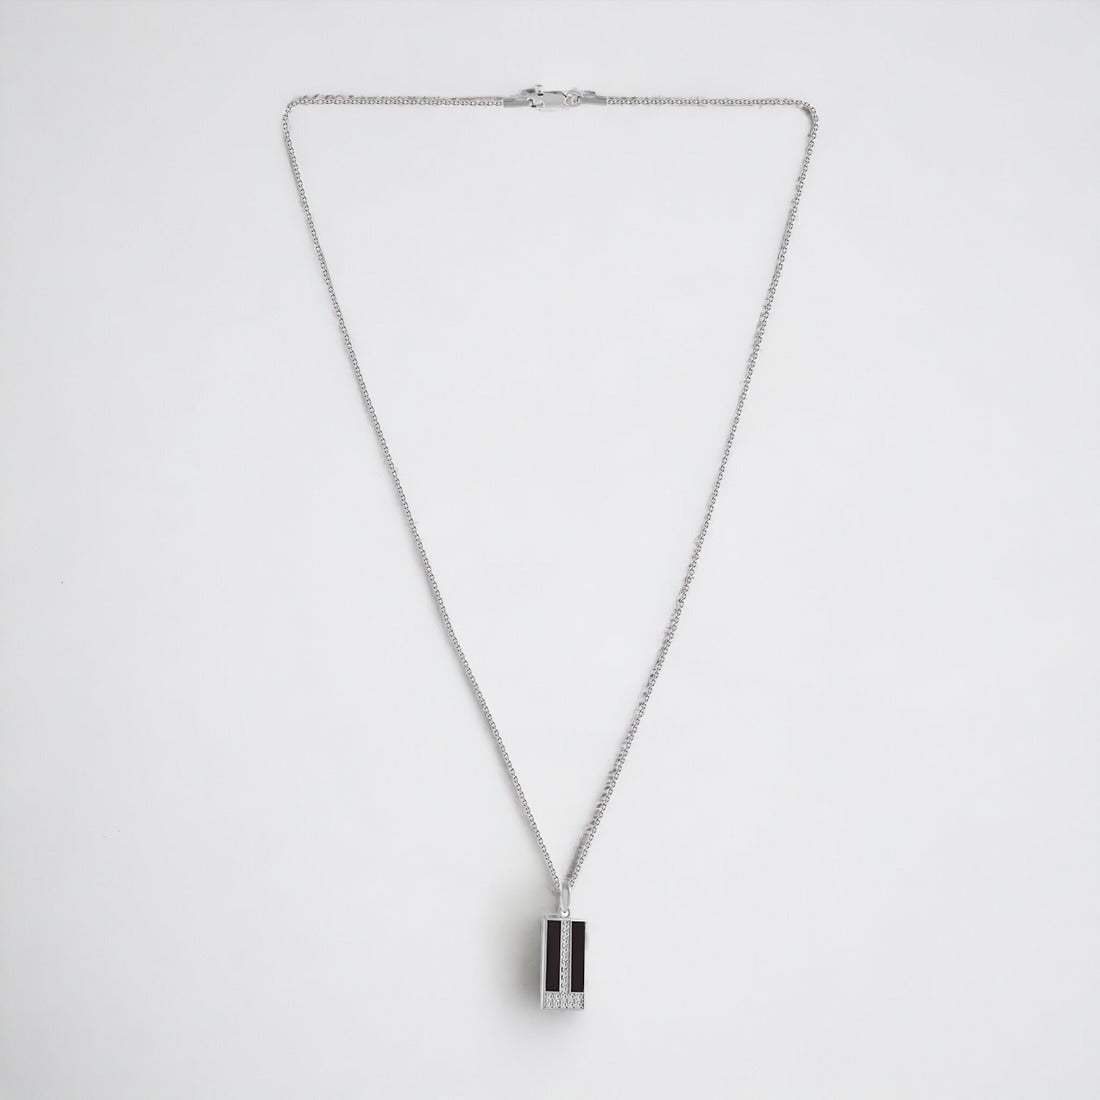 Black Rectangle Pendant With Chain For Women & Girls